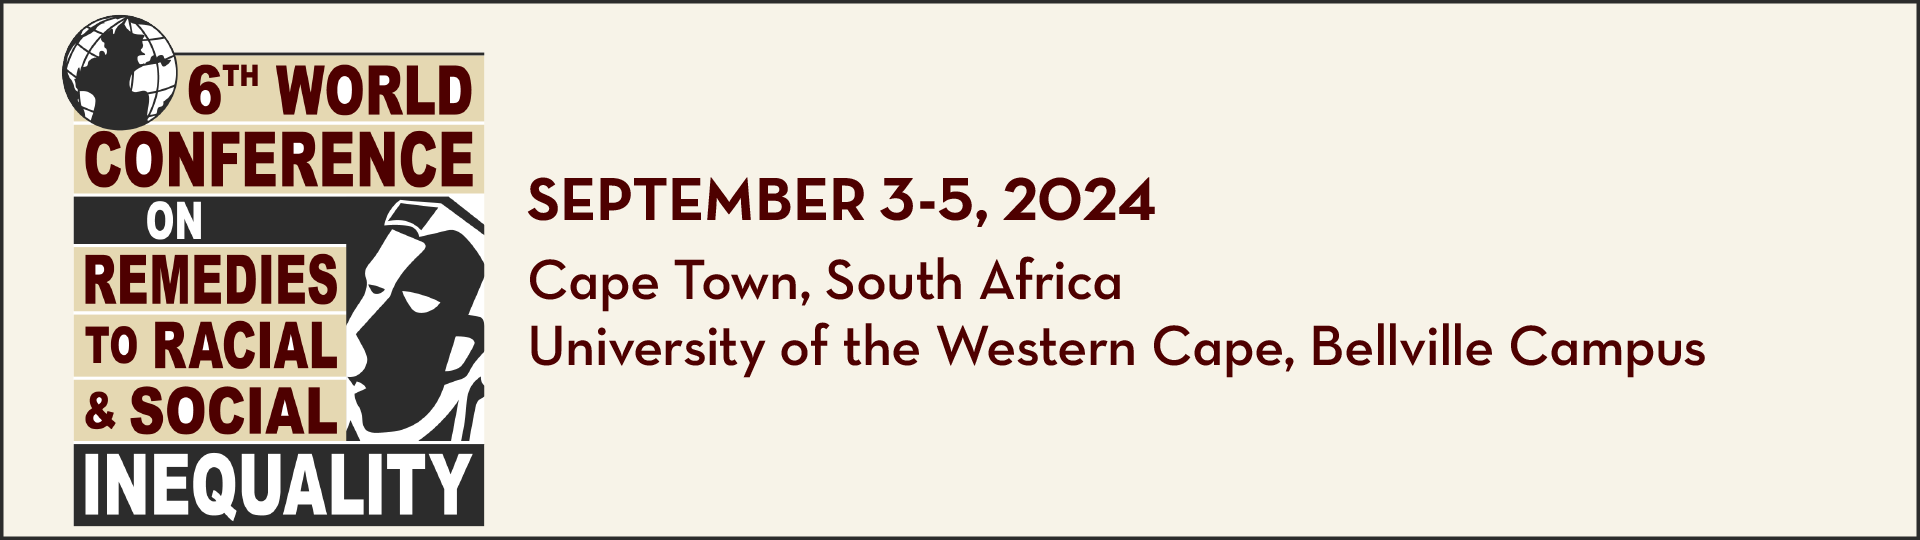 Sixth World Conference on Remedies to Racial and Social Inequality